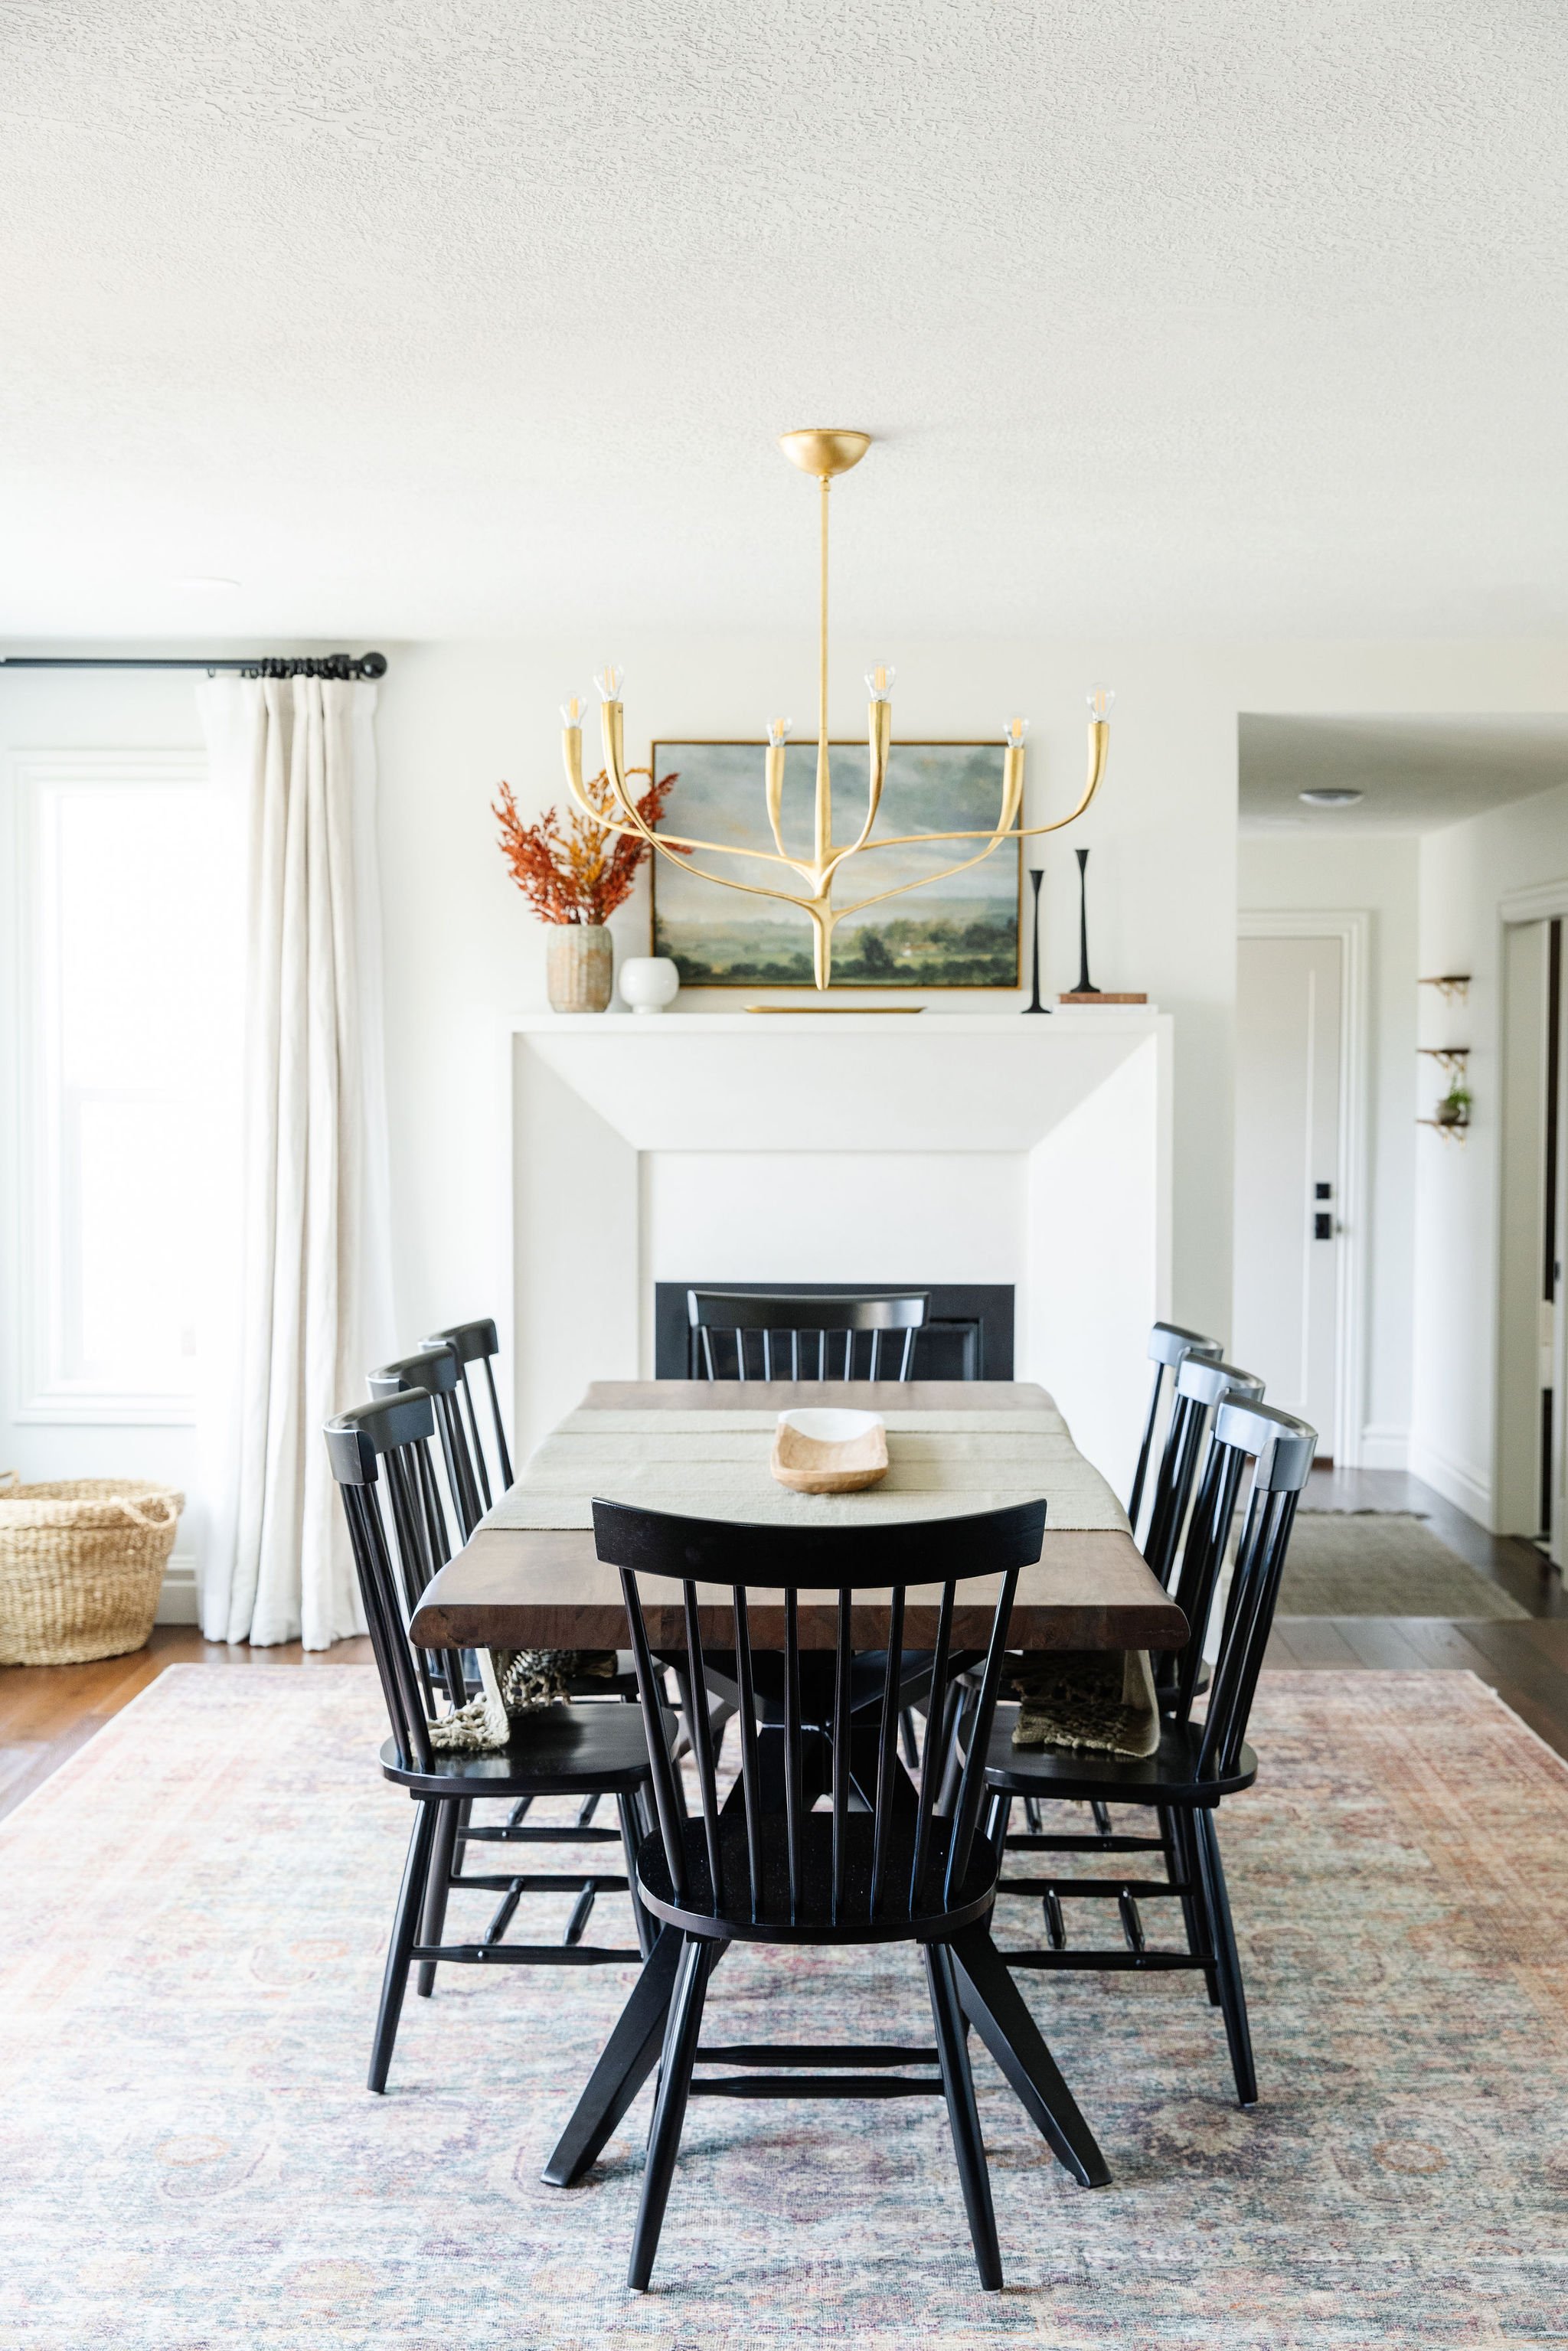  Liz Powell designs an inviting dining area with an elongated dining table positioned on an area rug with a golden chandelier centered above. Fireplace golden chandelier black chairs wooden table #beveledfireplace #largediningtable #diningroomarearug